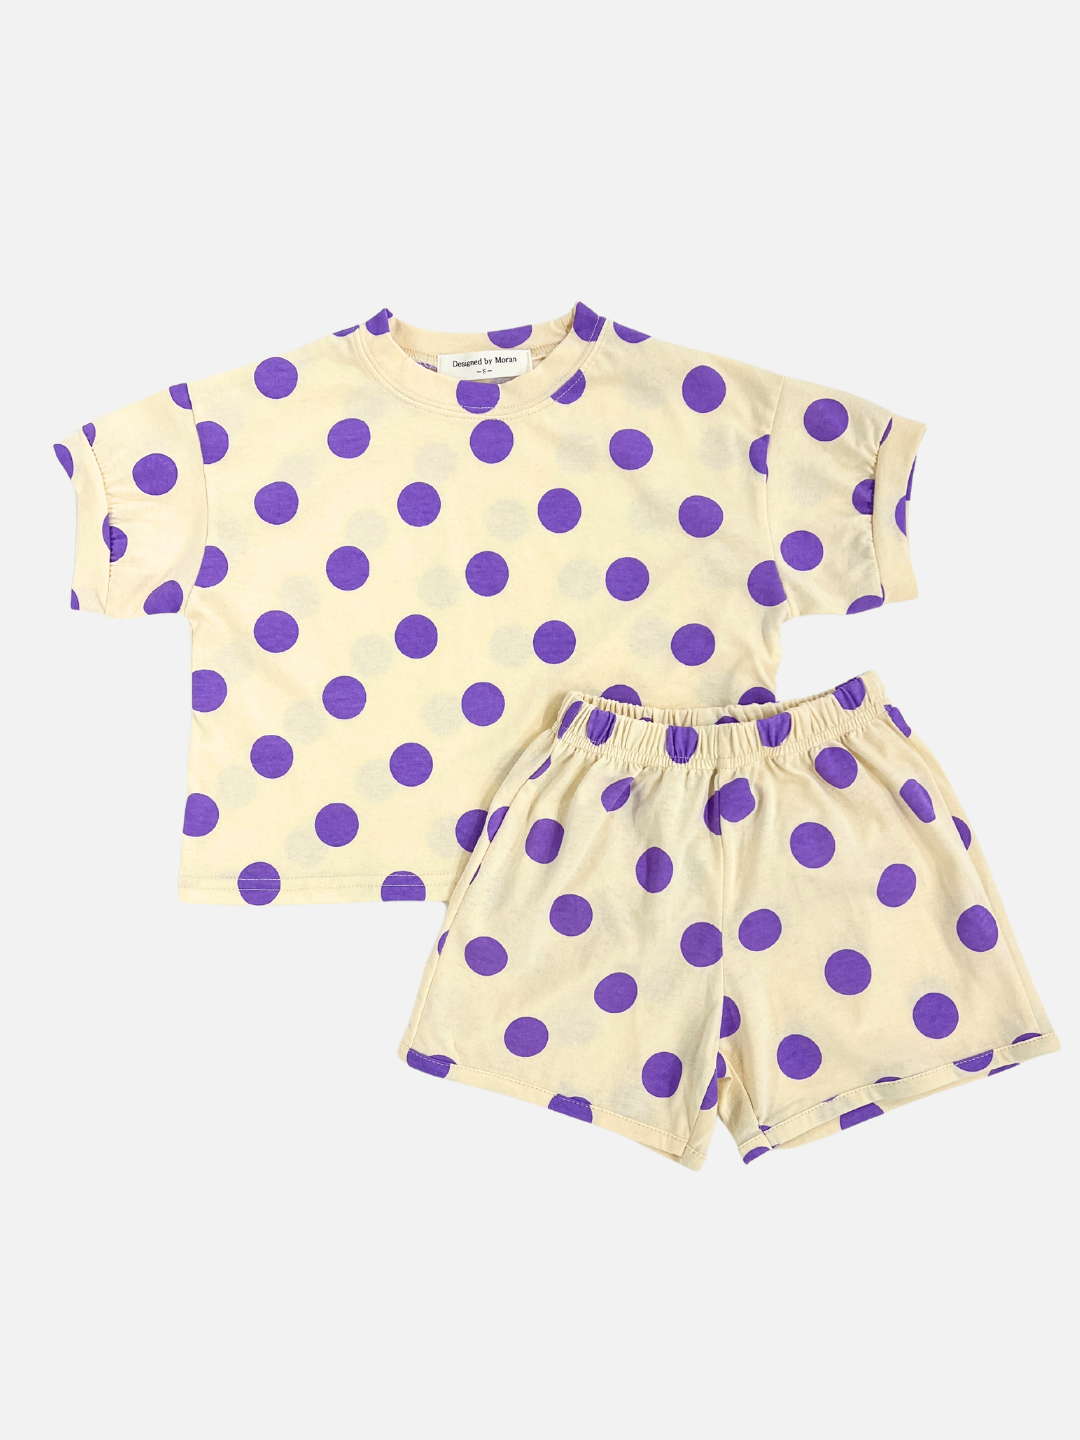 A kids' tee shirt and shorts set in a pattern of purple dots on an ecru background